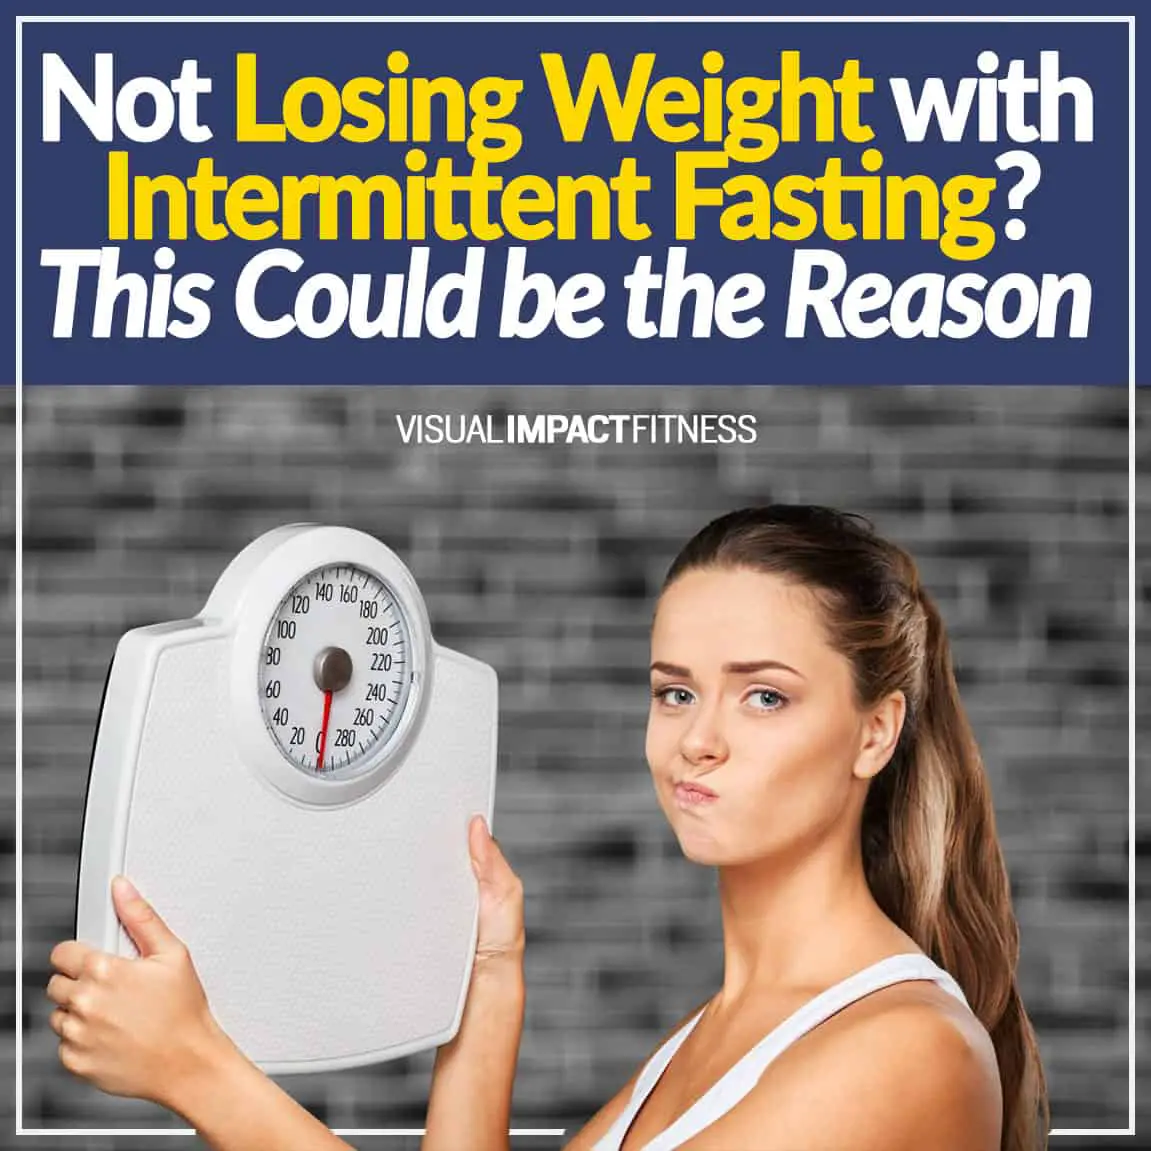 Not Losing Weight with Intermittent Fasting? This Could be the Reason